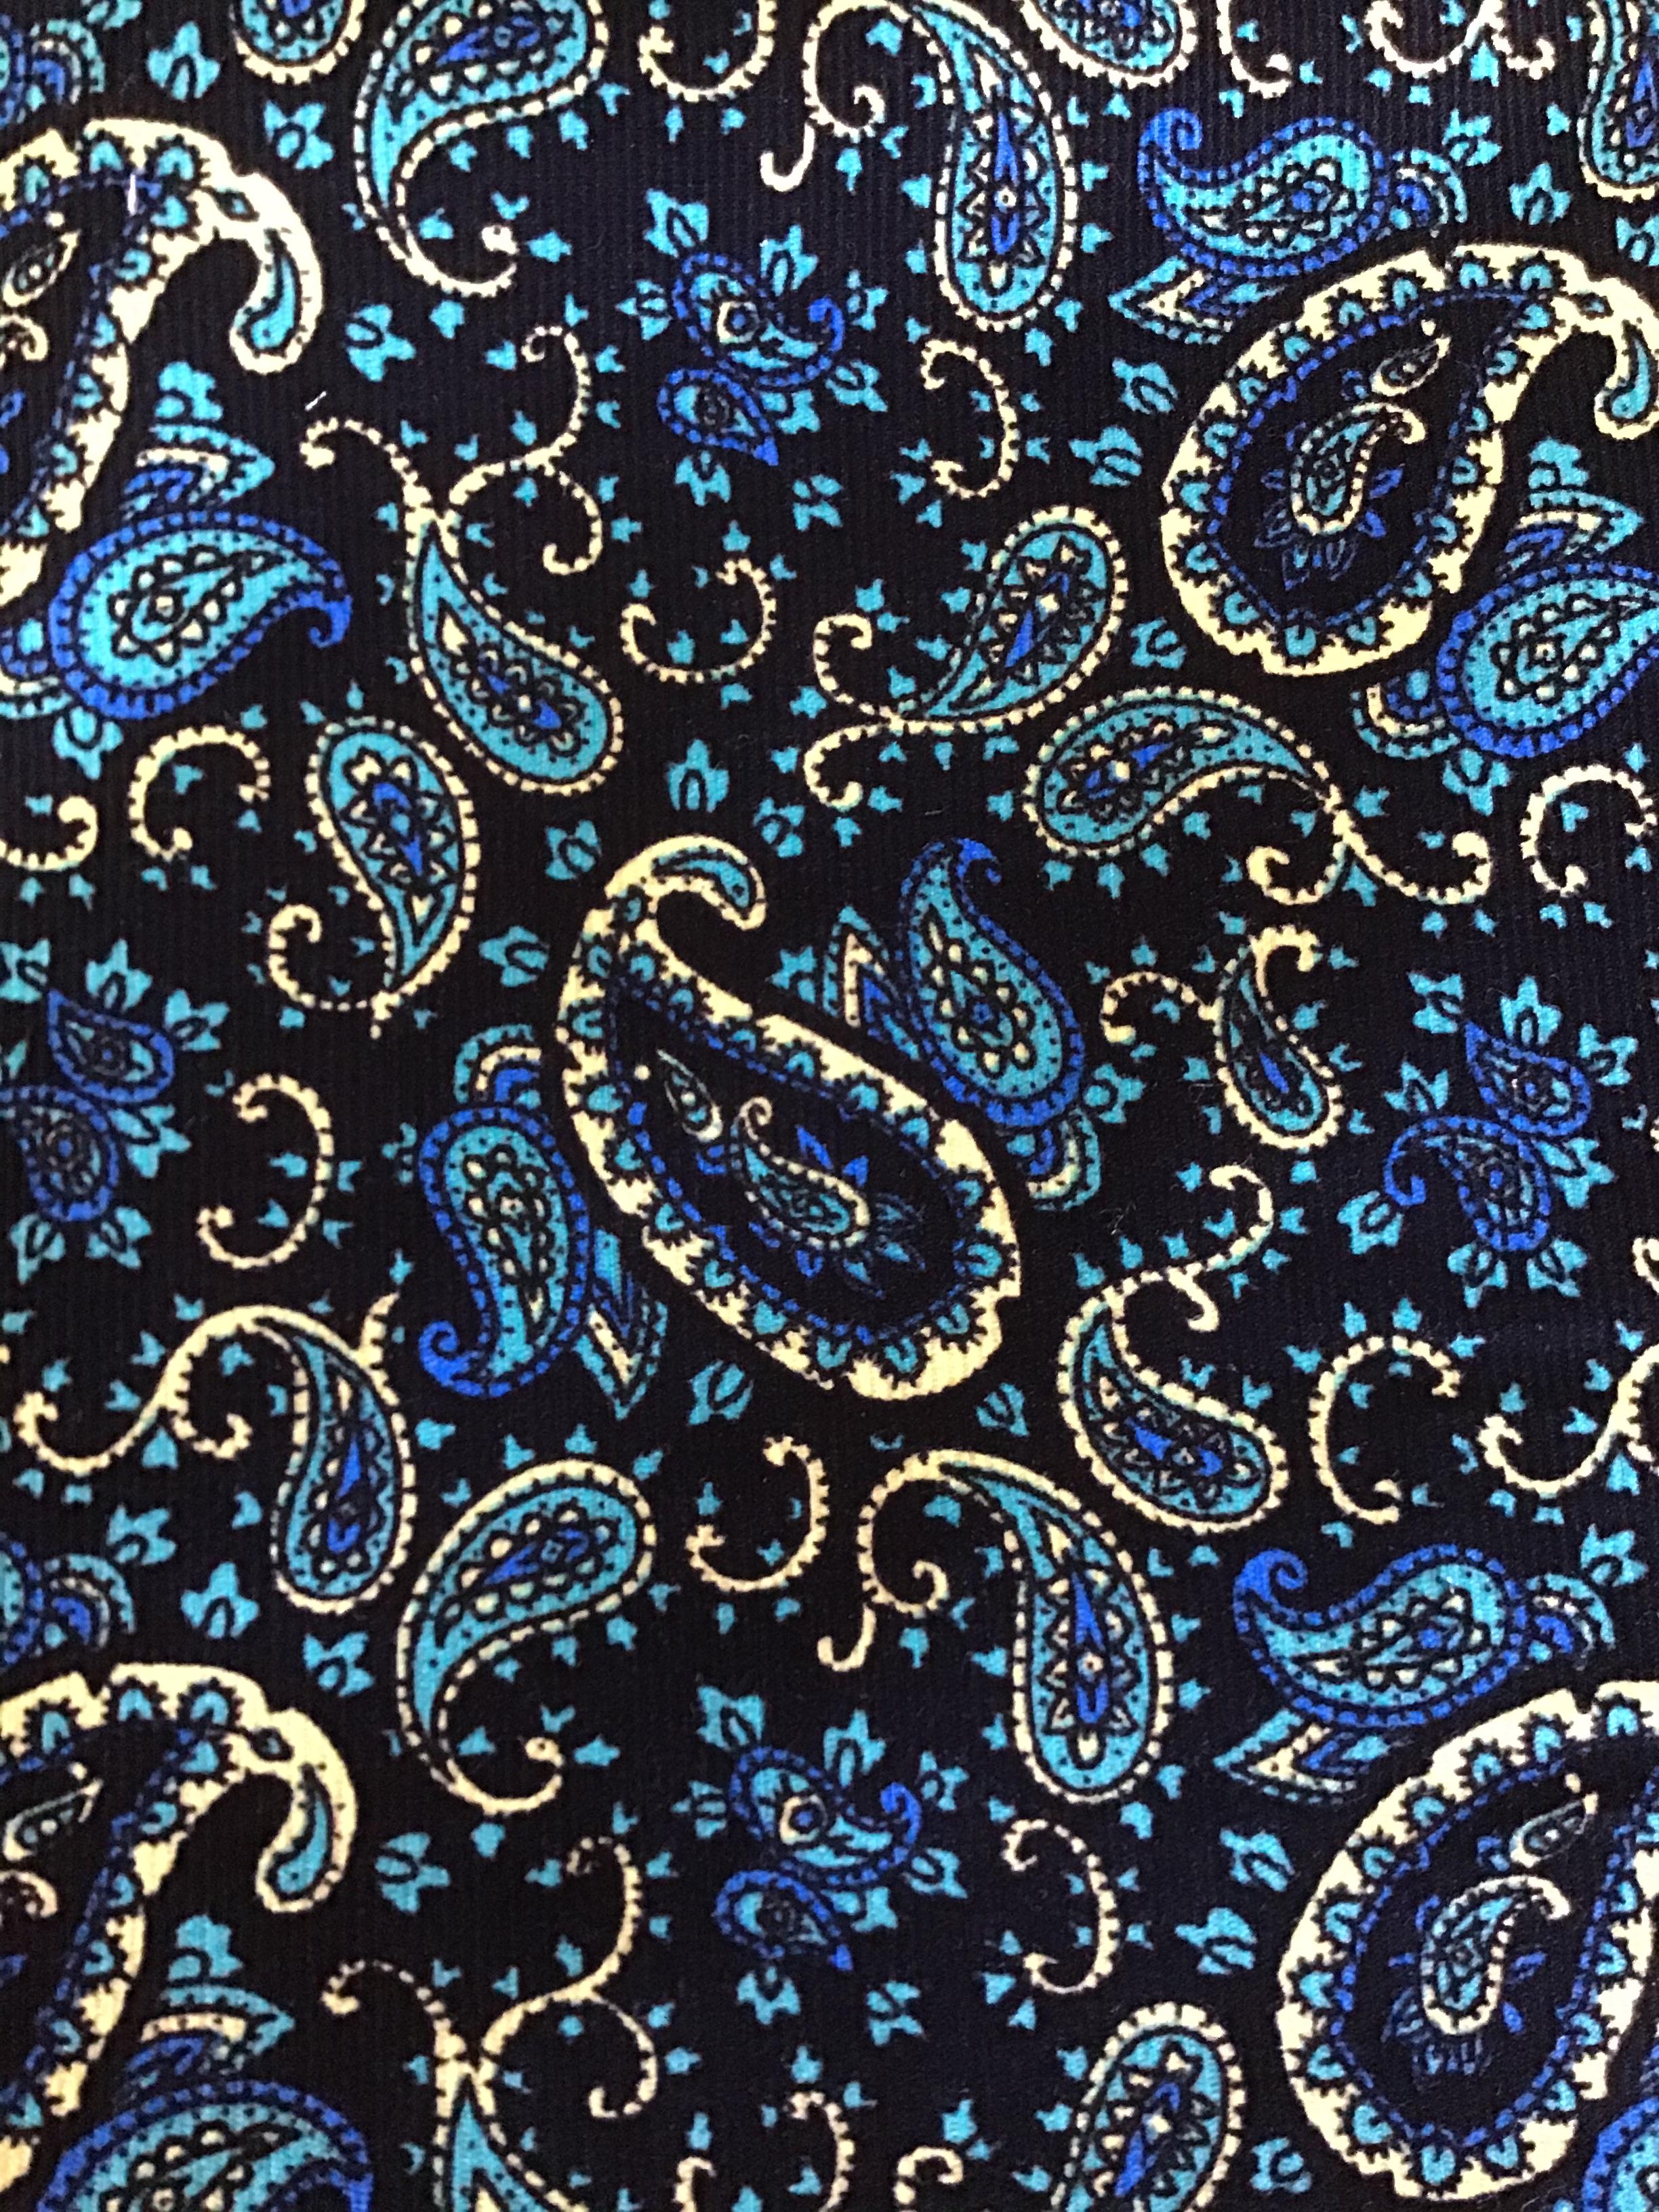 The Origin Of The Paisley Pattern – The East India, 44% OFF